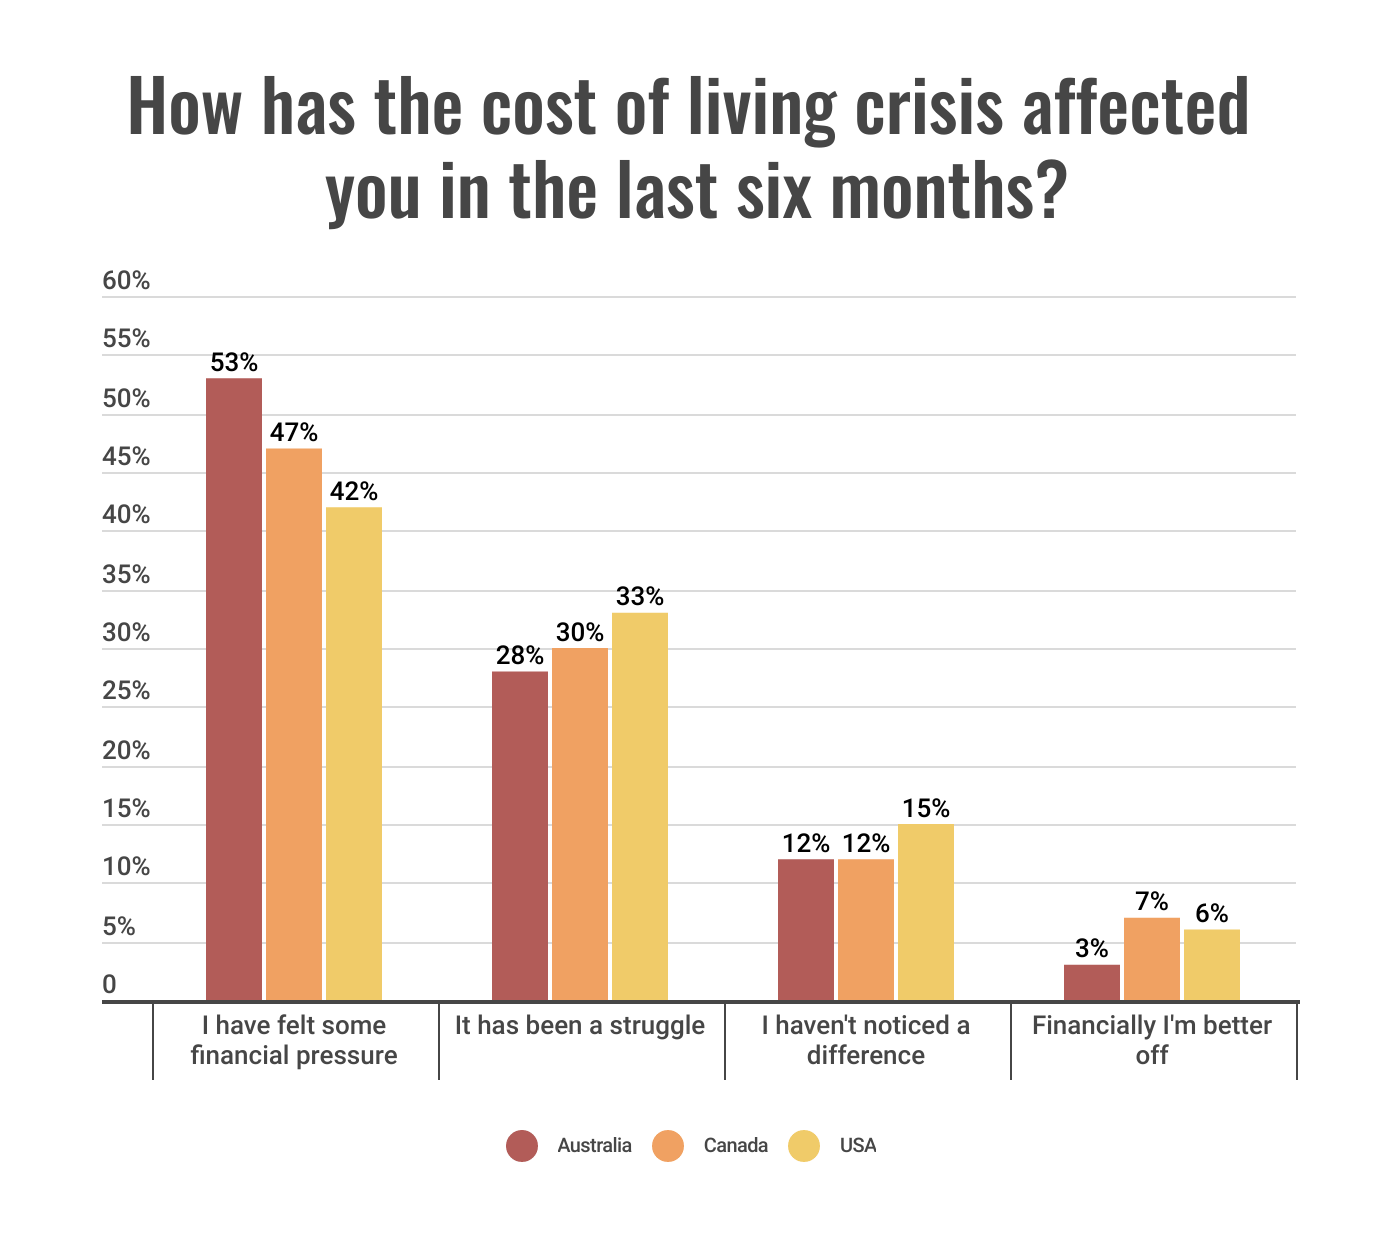 a bar graph showing how Australians, Canadians and Americans have been affected by the cost of living